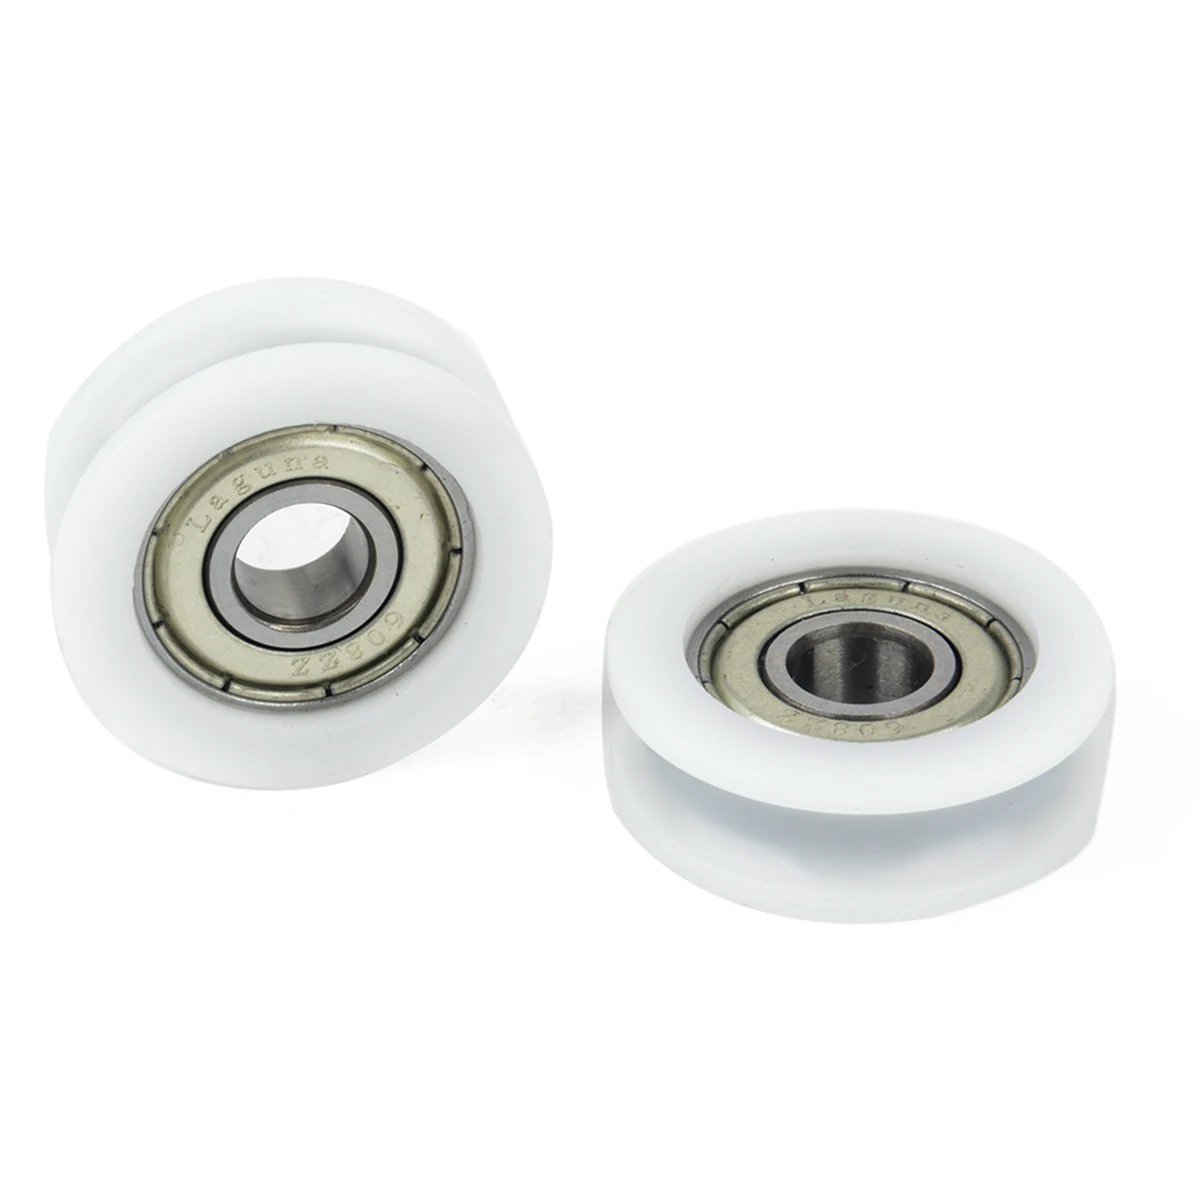 5pcs Nylon Plastic Ball Bearings Embedded 608 U Groove Ball Bearing Guide Pulley 8X30X10mm For Guide Roller Hardware Accessories